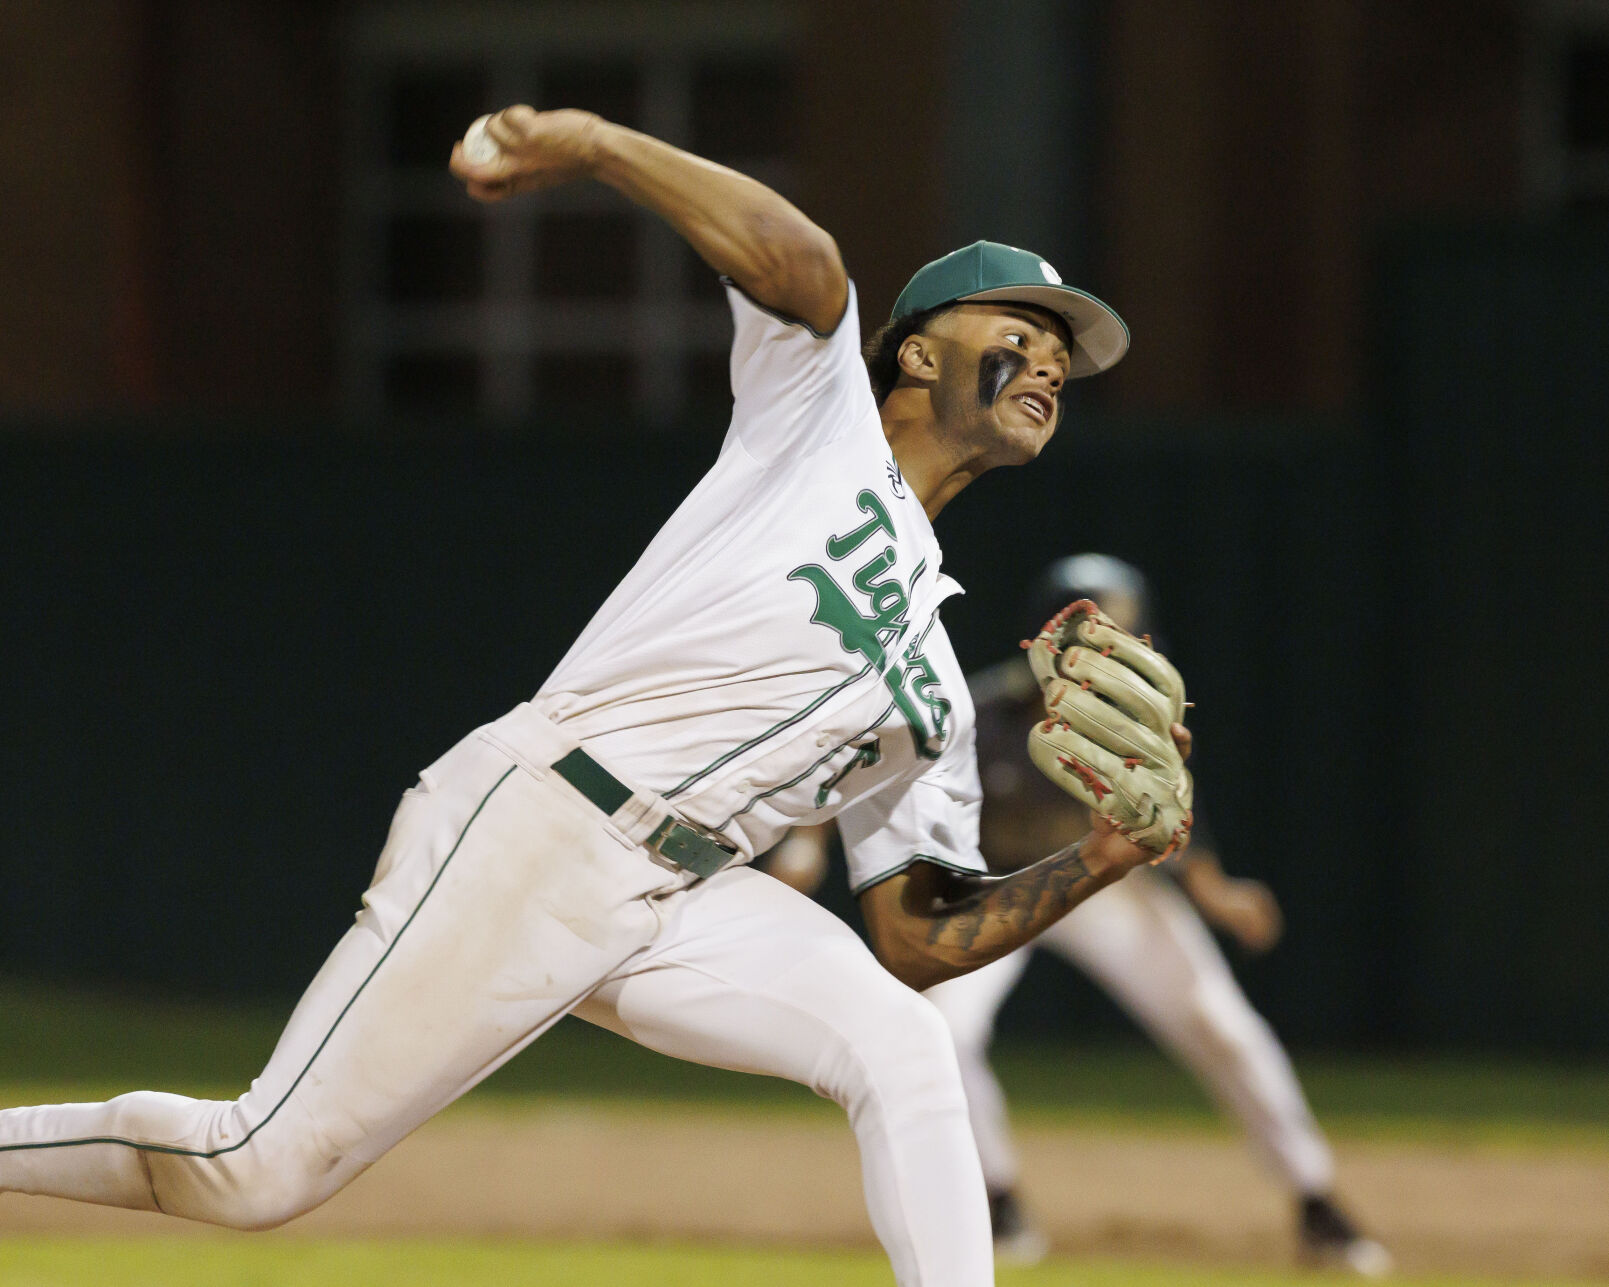 Slidell vs. Chalmette Baseball: Pitching Duel Leads Slidell Tigers to 1-0 Victory